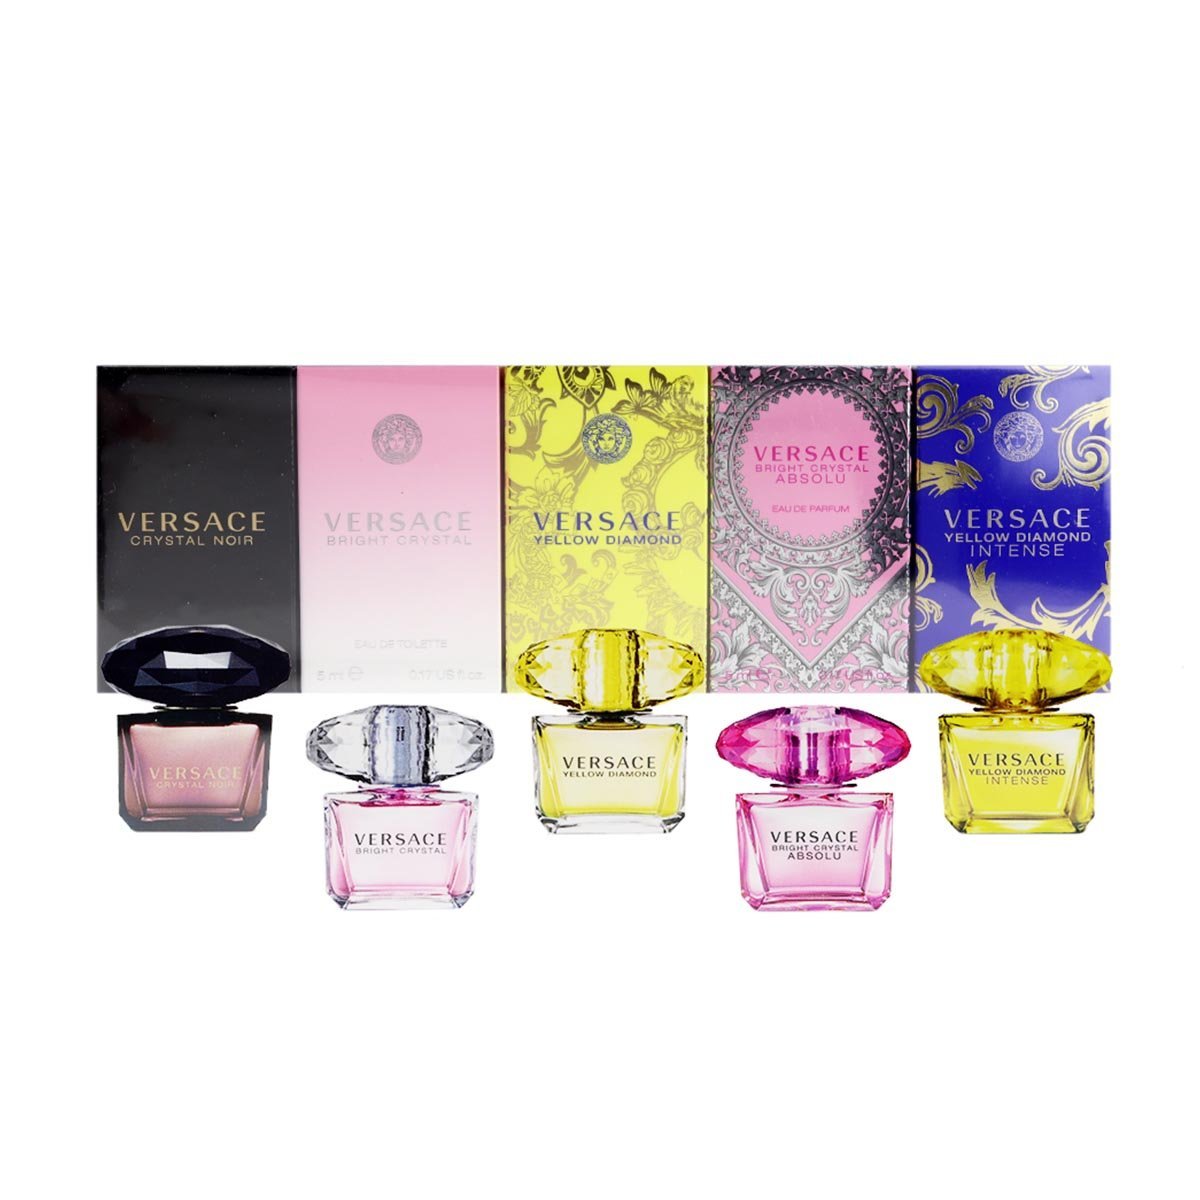 Versace Crystal Miniature Collection For Her - My Perfume Shop Australia